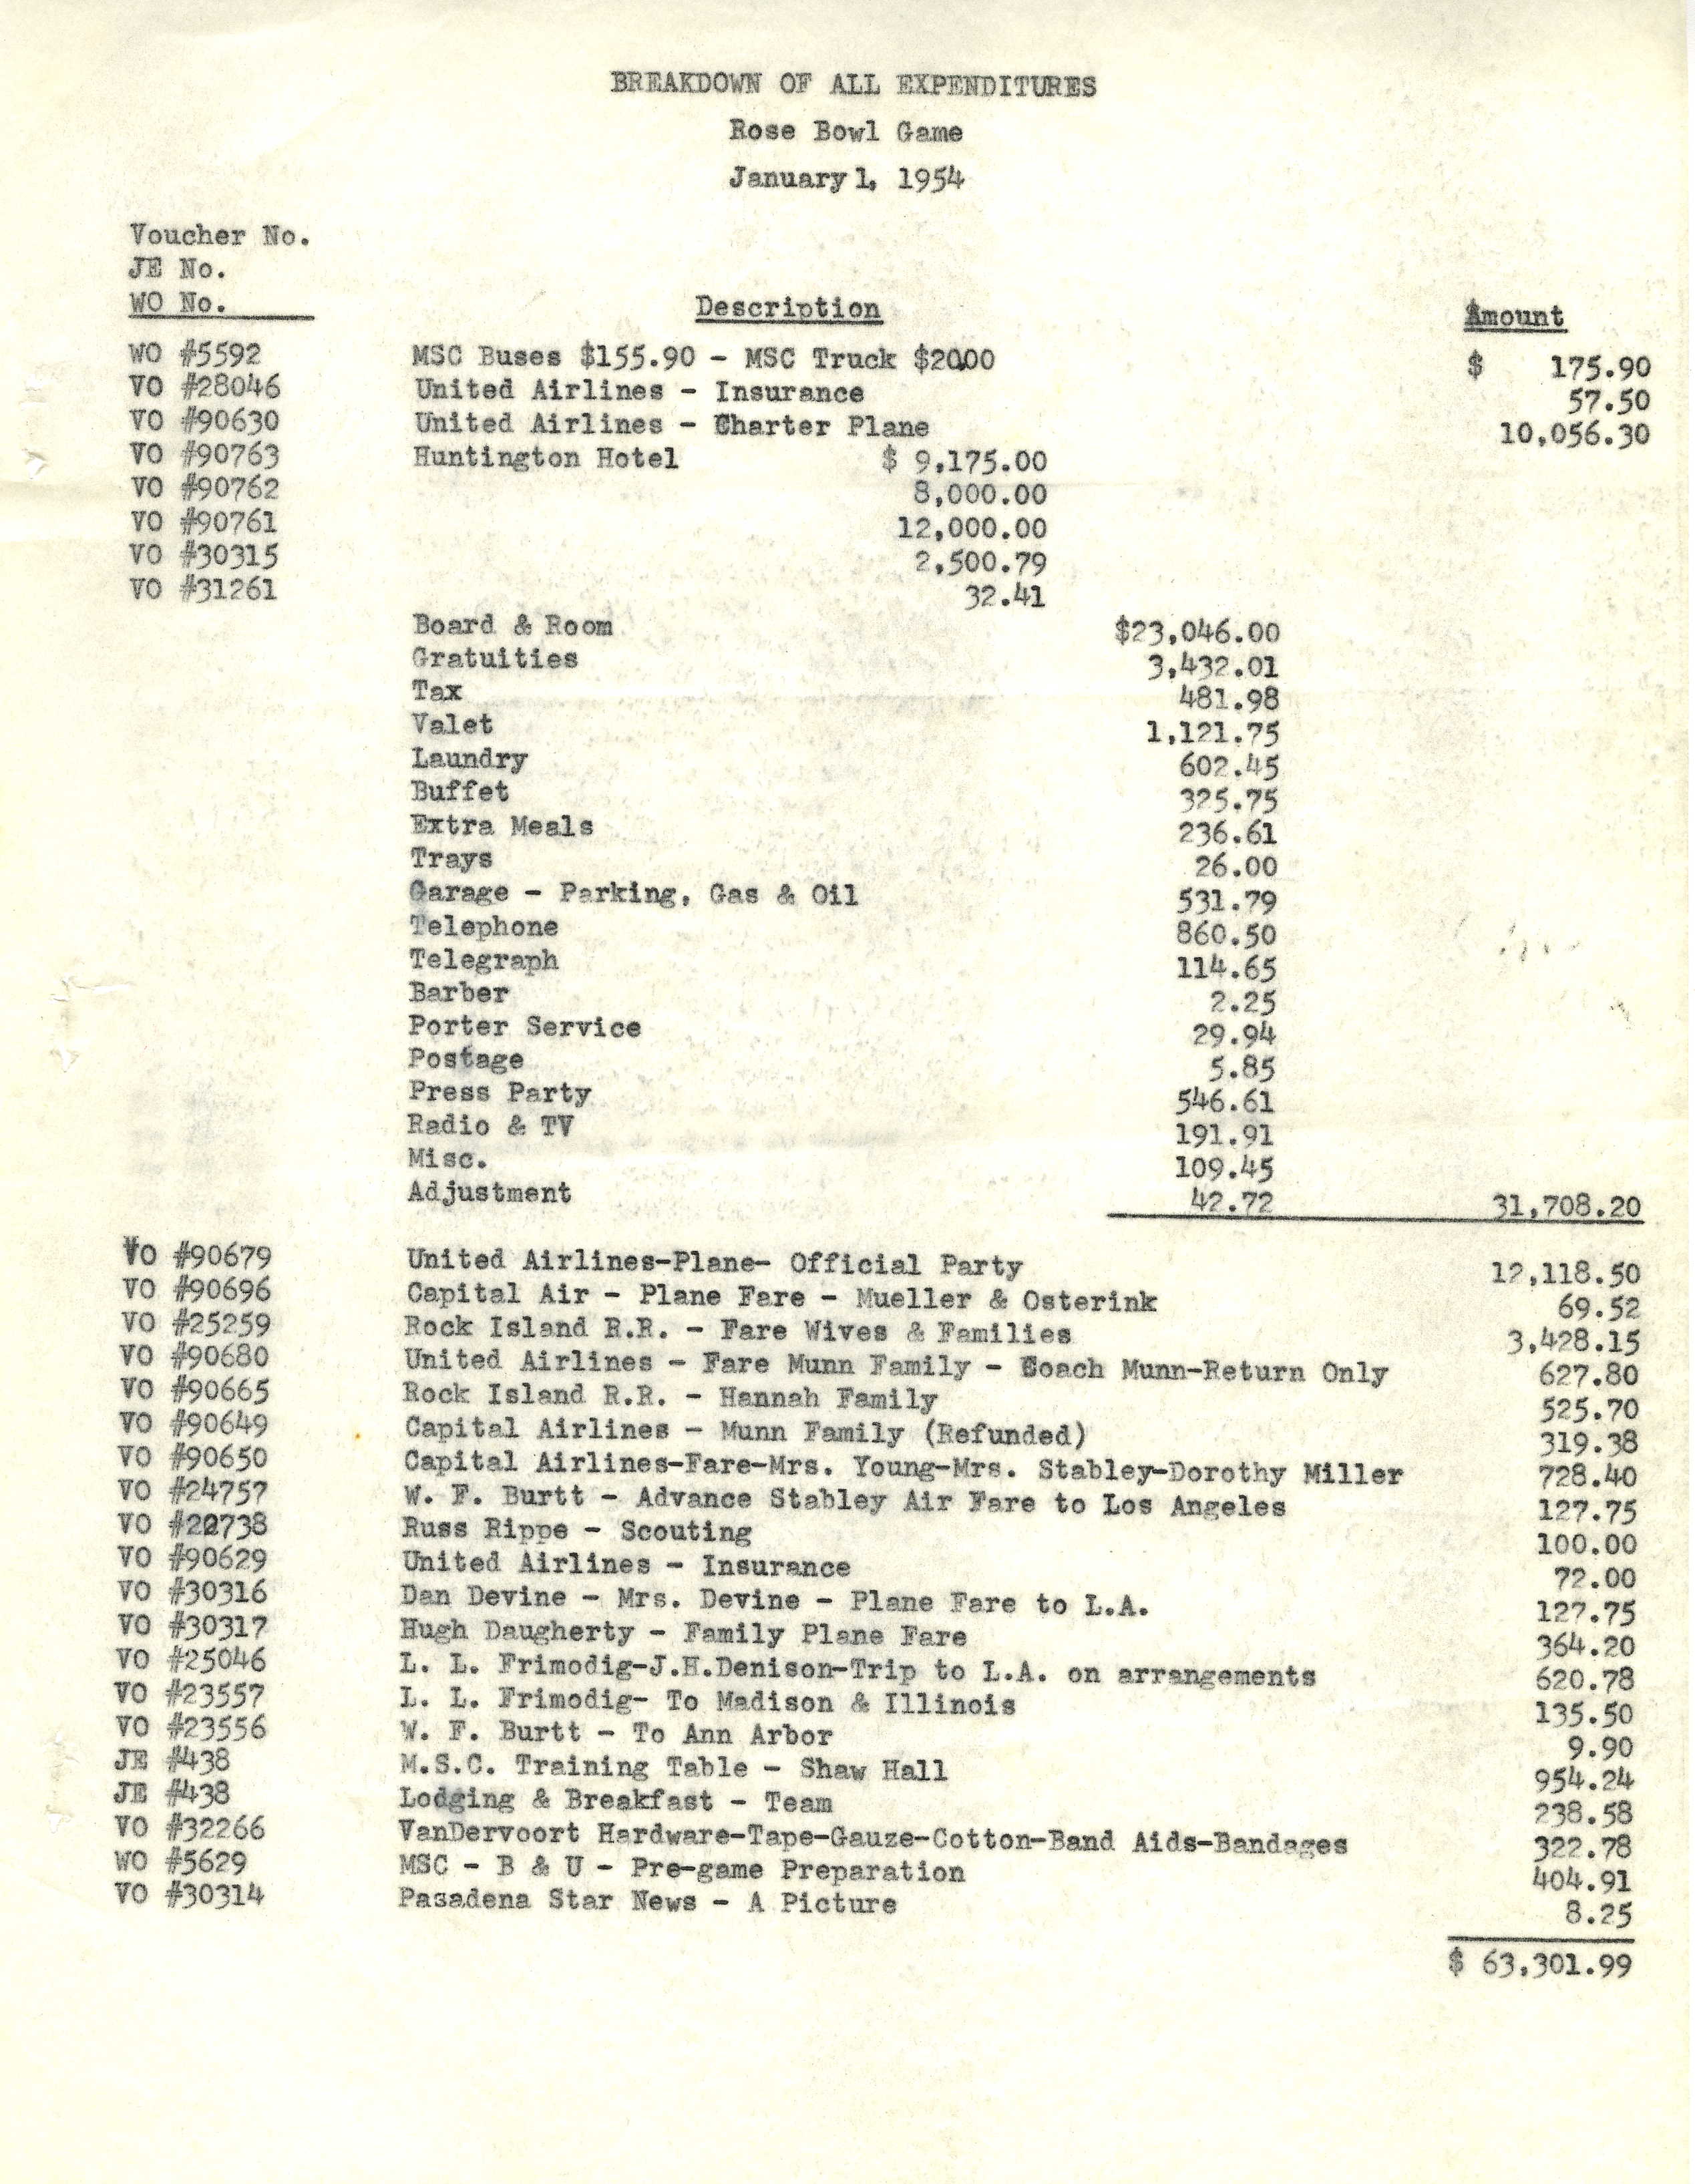 Breakdown of All Expenditures, 1954 Rose Bowl